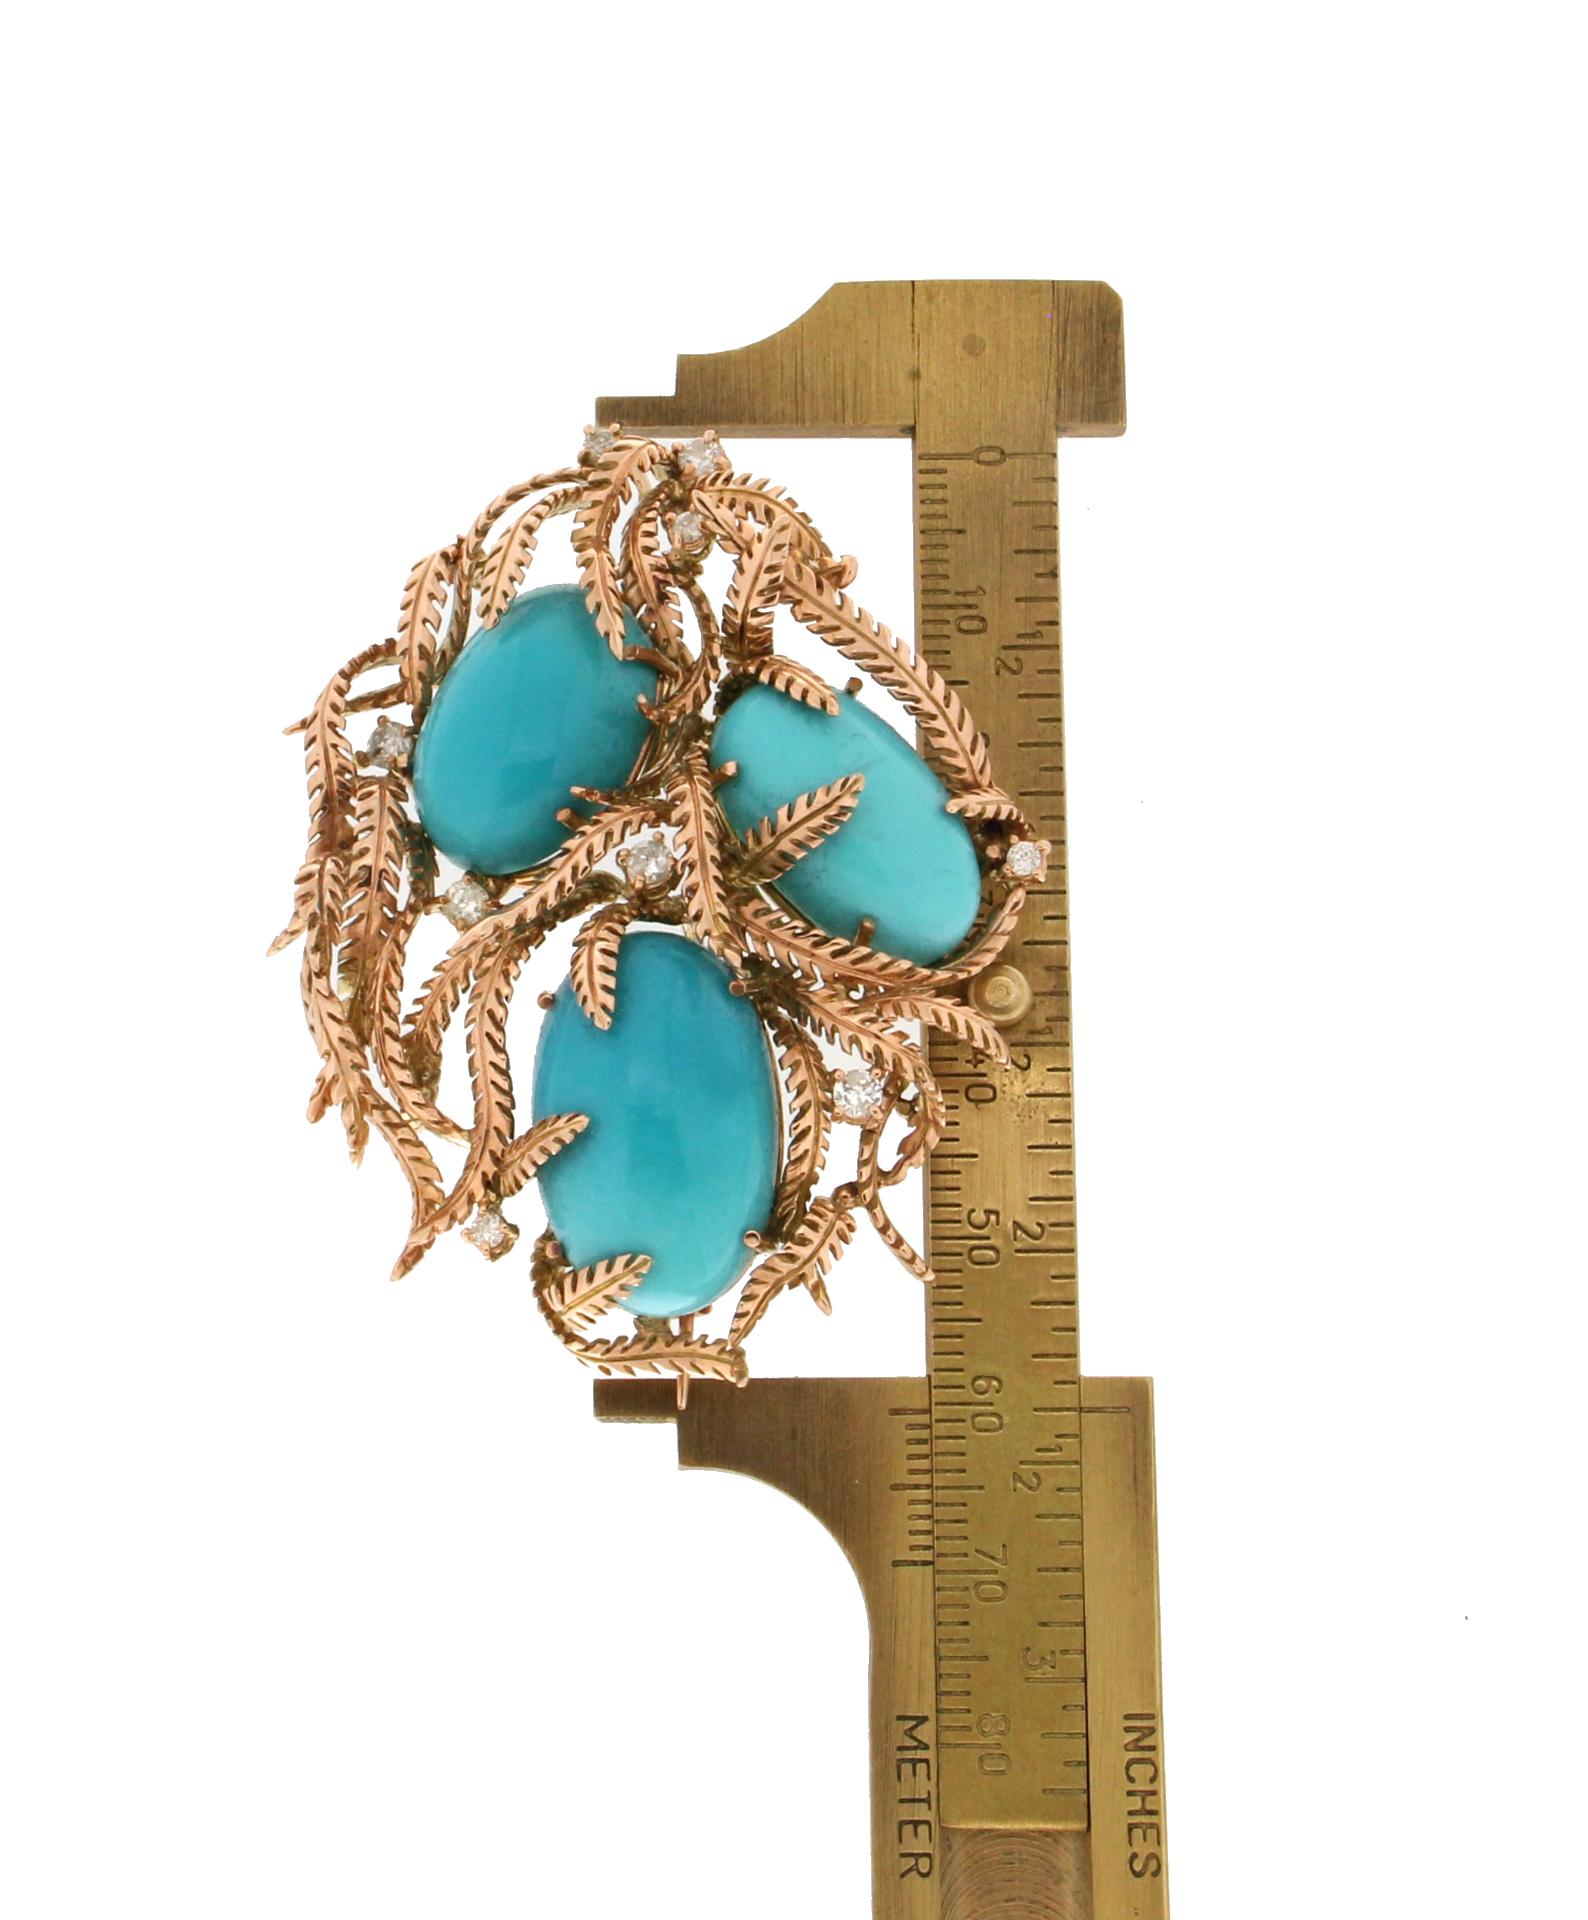 Handcraft Turquoise 14 Karat Yellow Gold Diamonds Pendant Necklace and Brooch For Sale 3